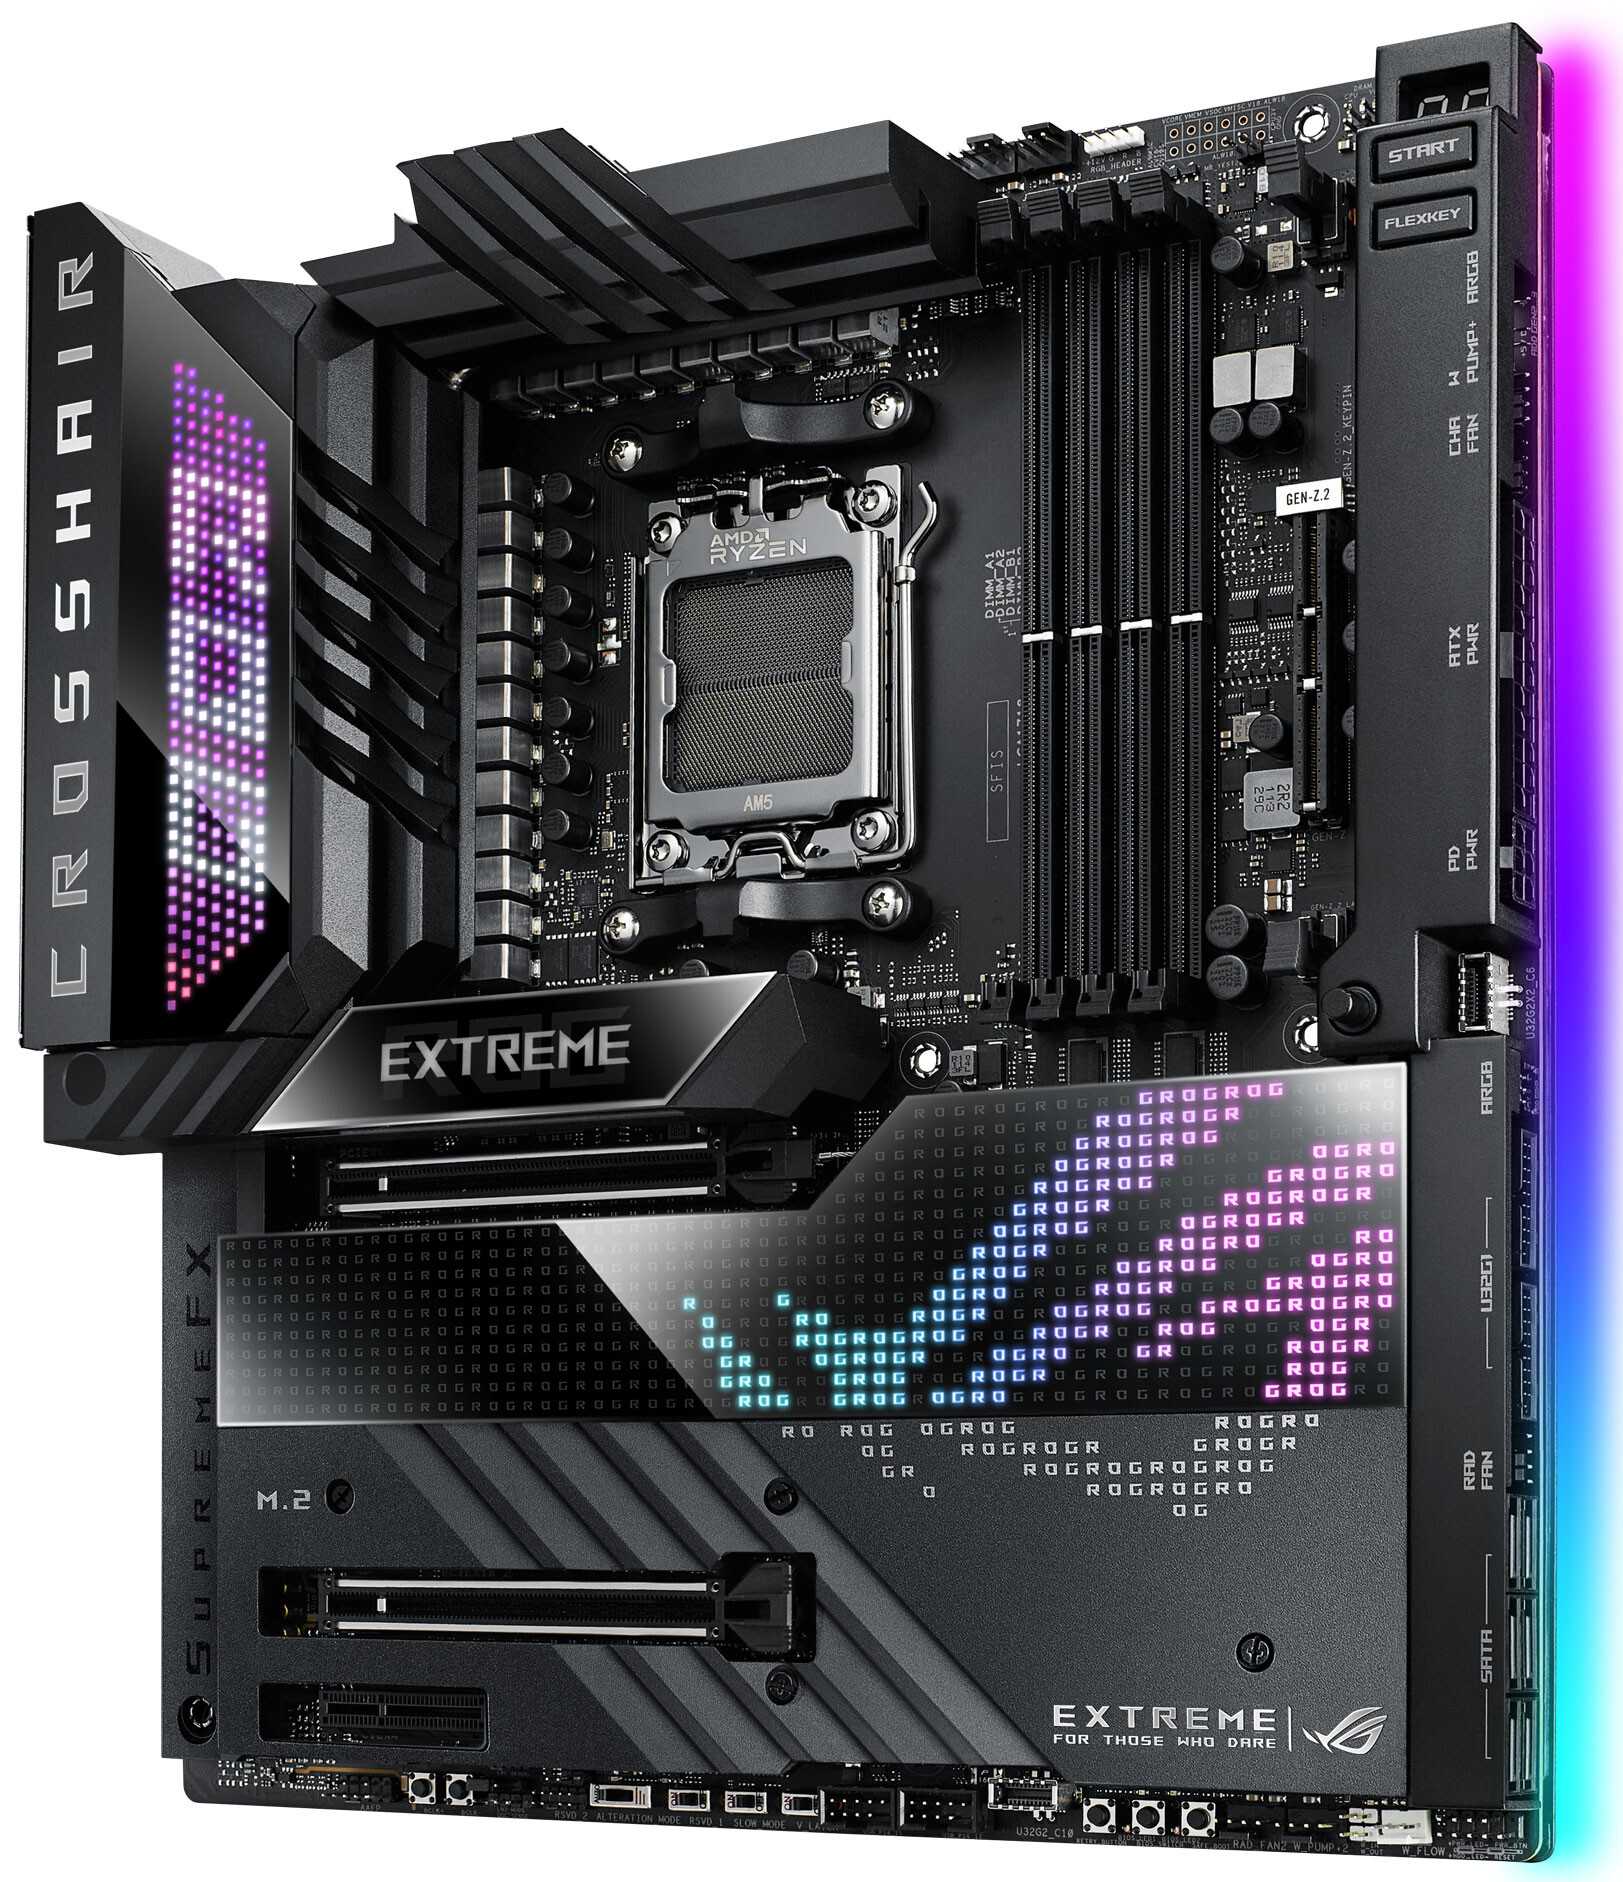 ASUS announces new AMD X670E motherboards